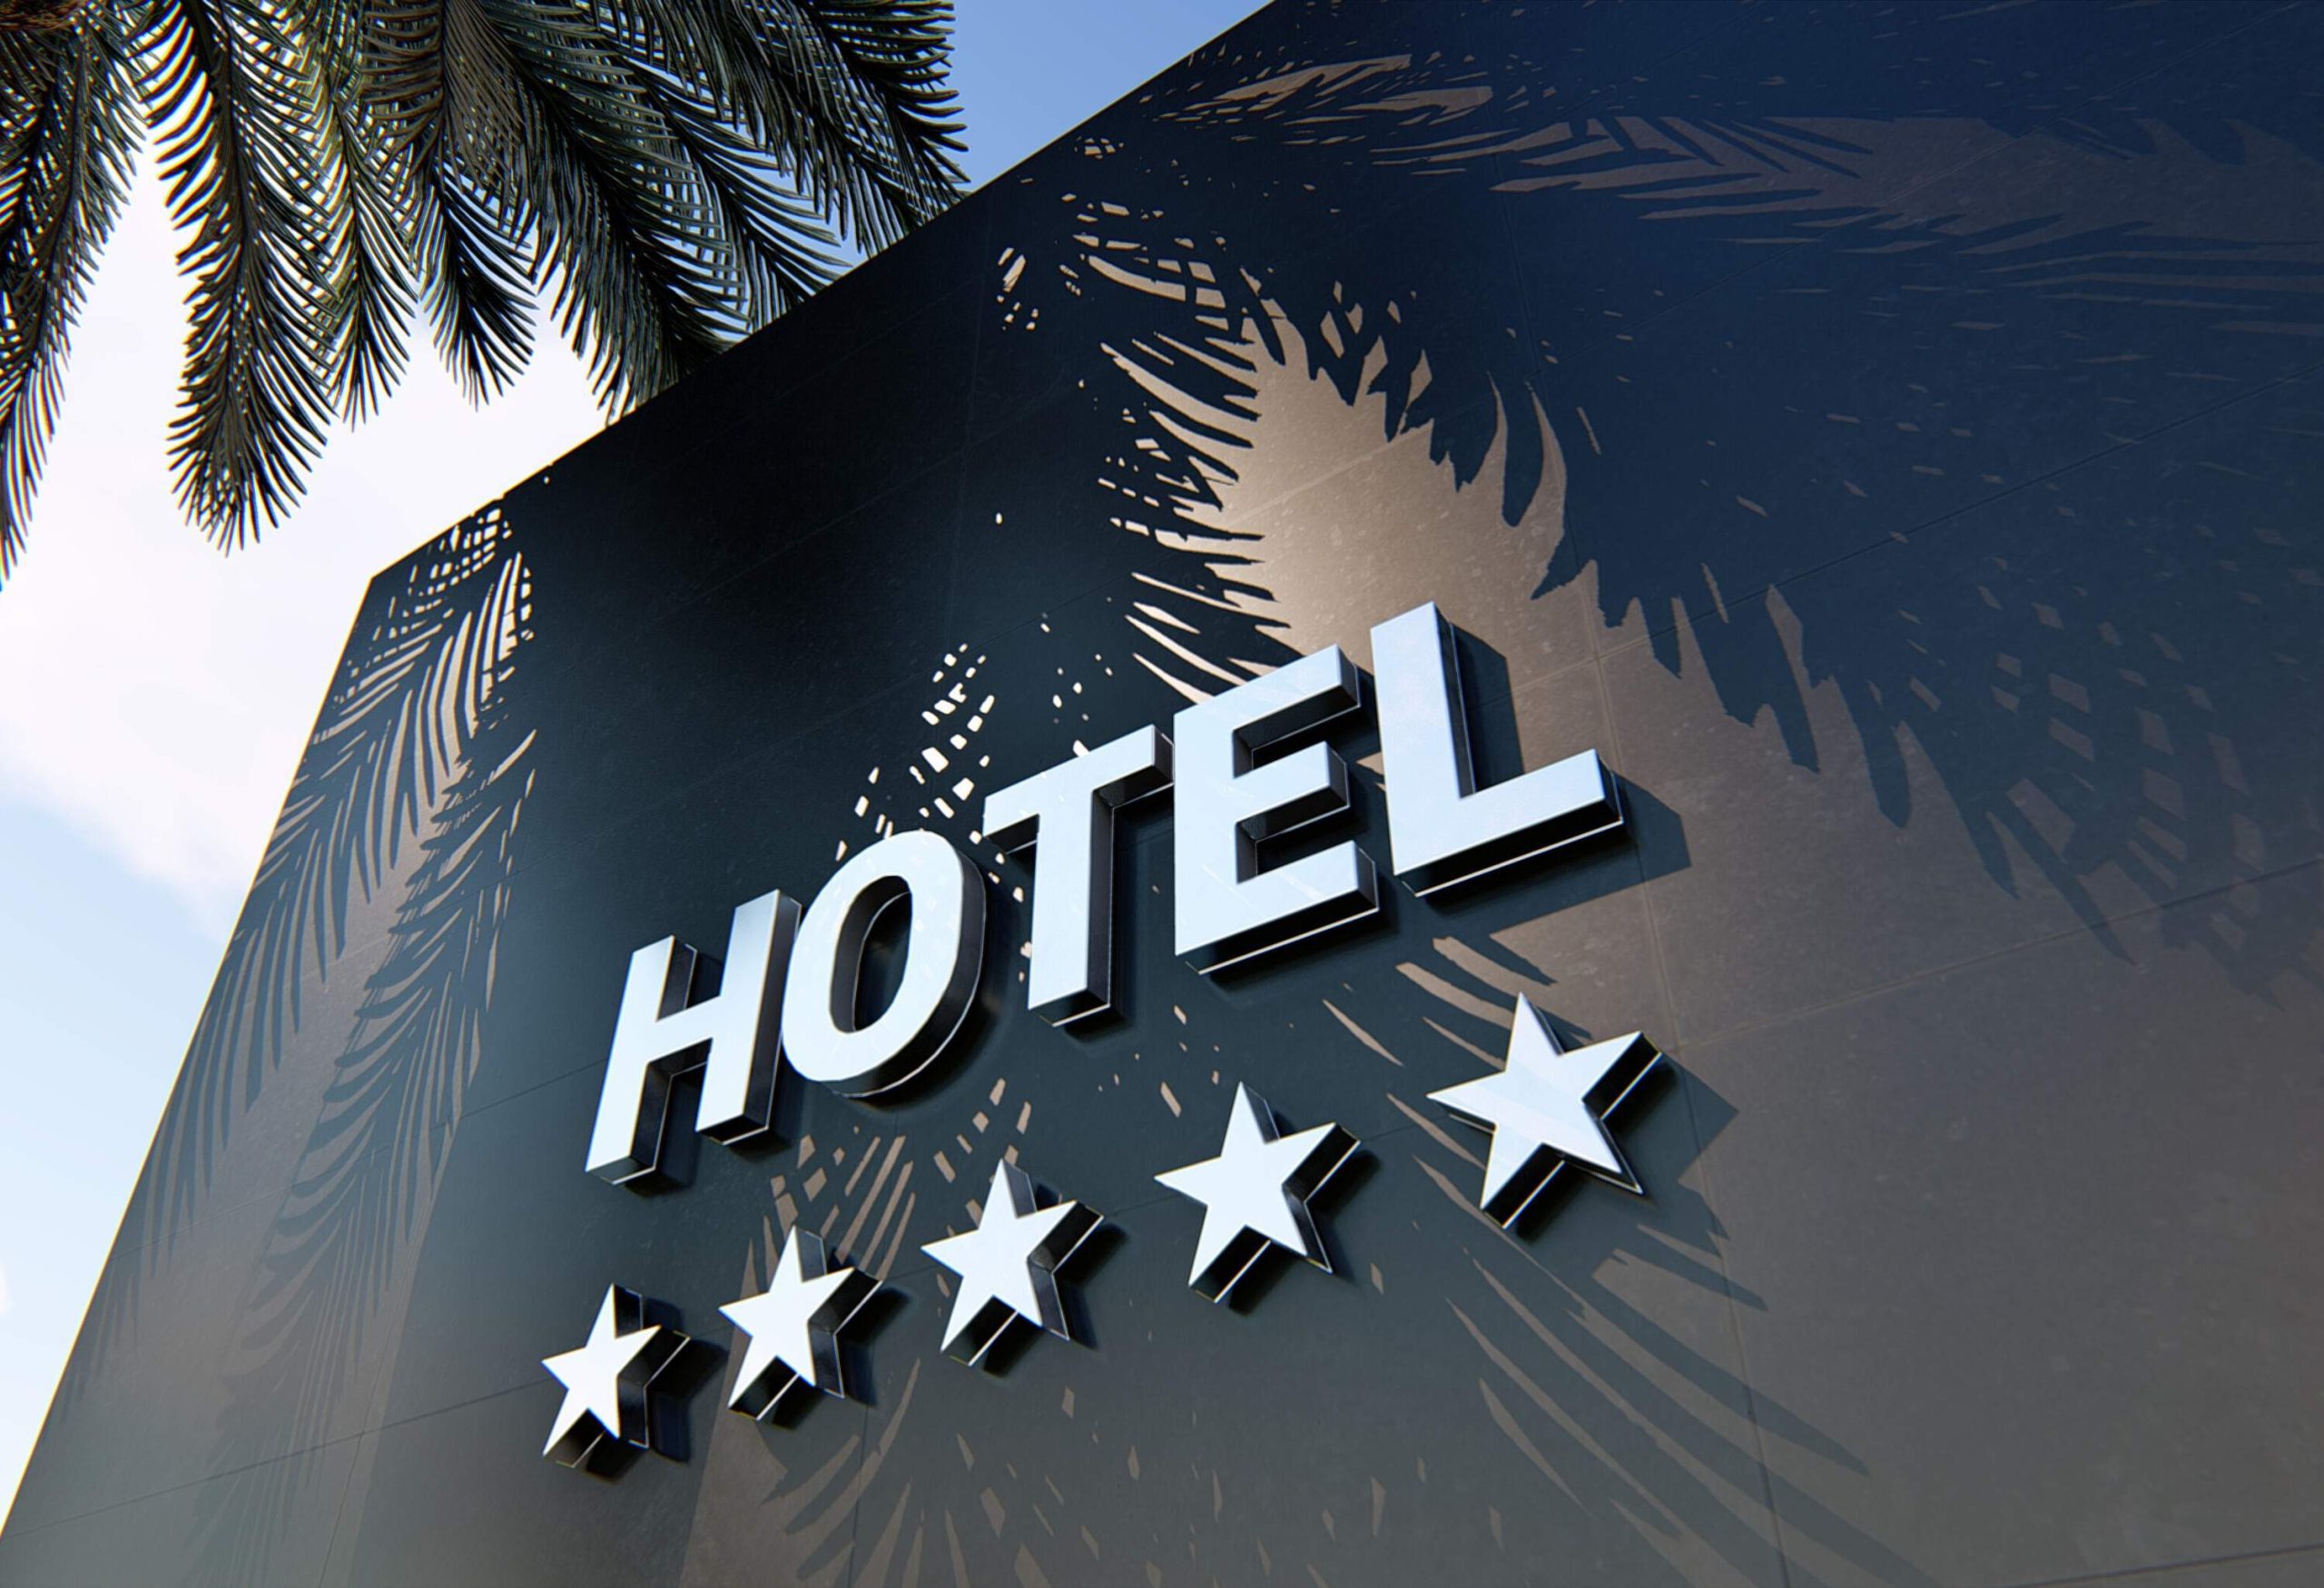 theme_hotel_sign_five_stars_facade_building_gettyimages-1320779330